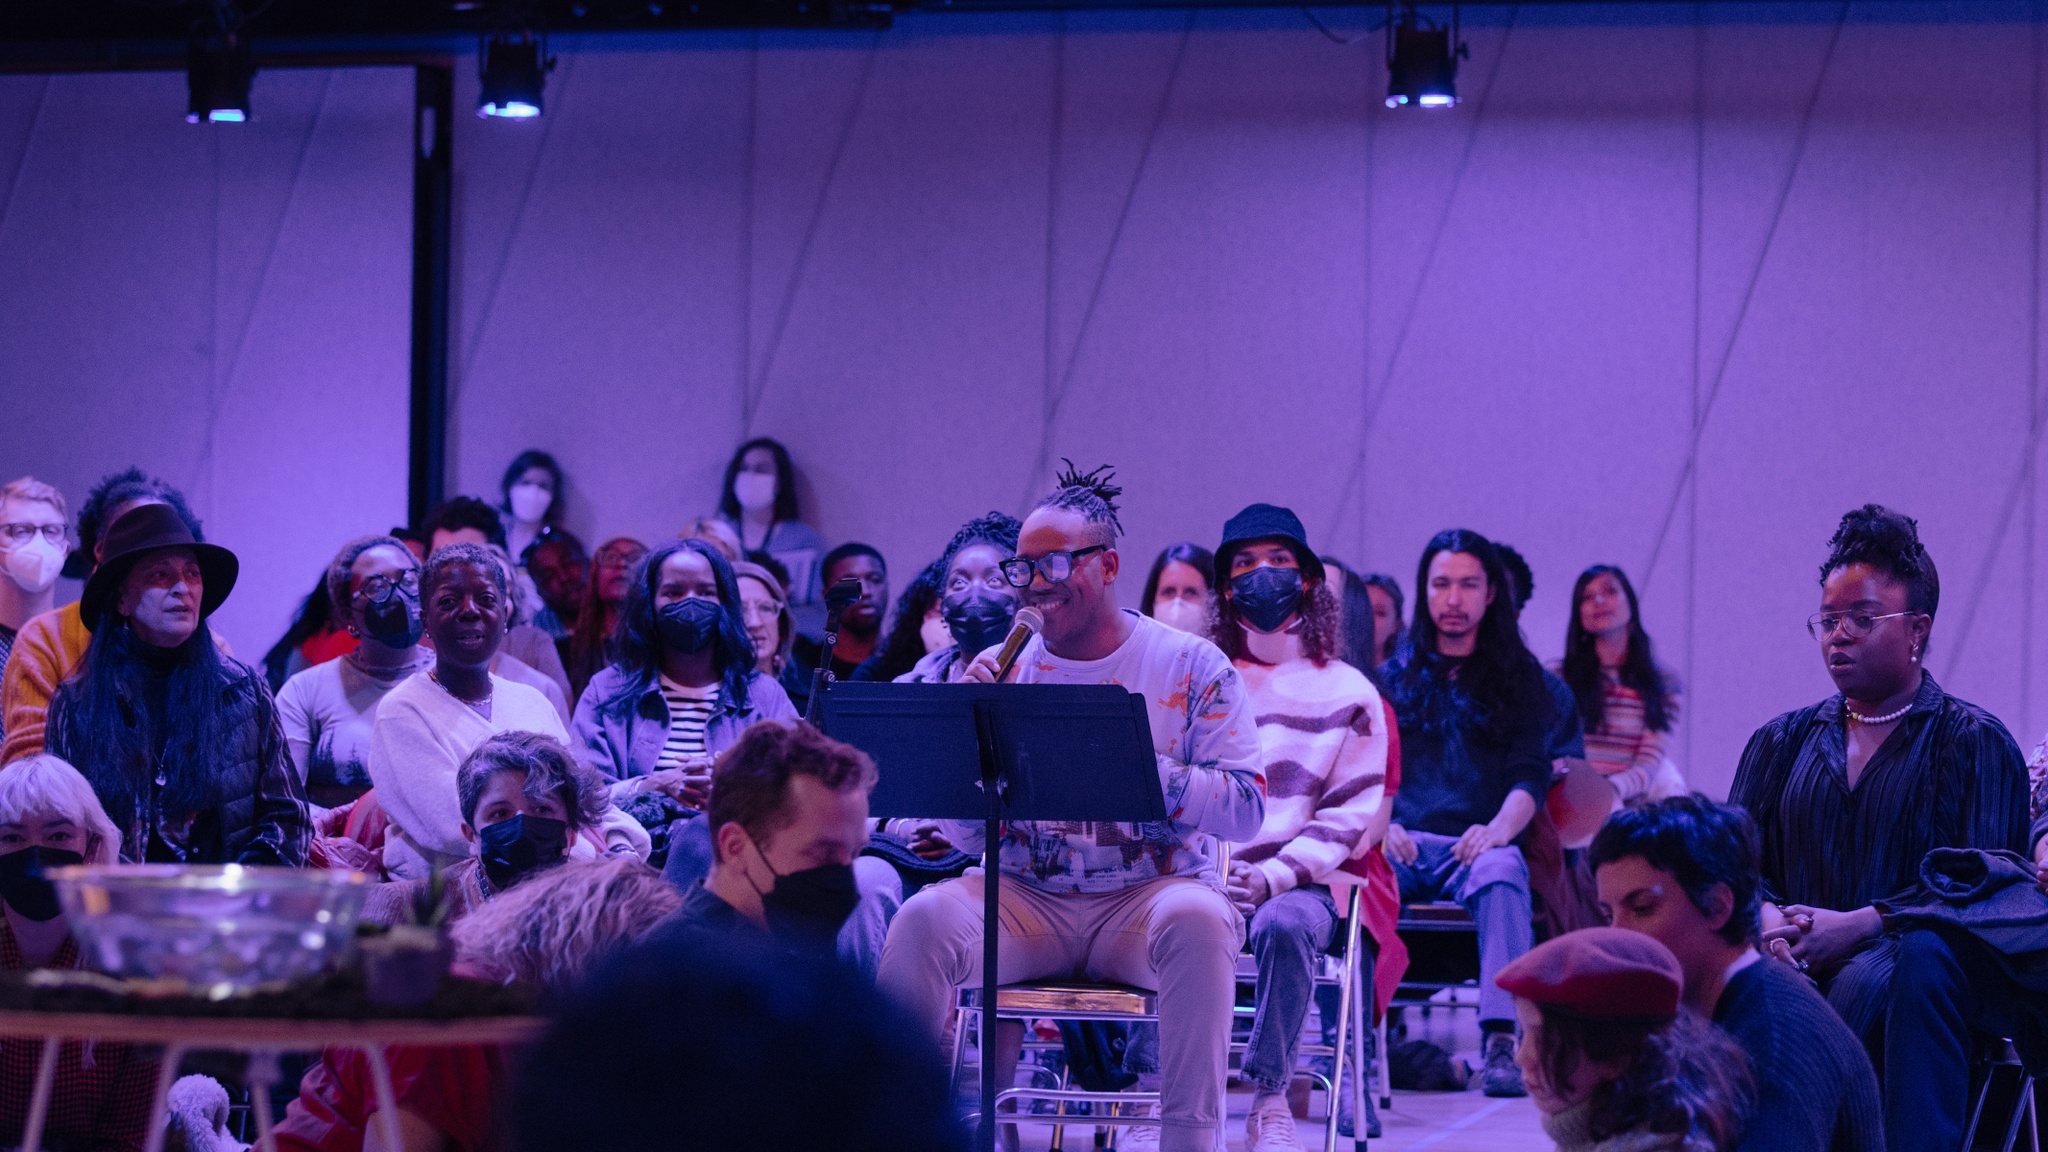 A performance space suffused in purple light. Choir members sit in chairs arranged in multiple rows in a circle with audience members mixed in. At the center, Troy Anthony, a Black man and artistic director of The Fire Ensemble, speaks into a microphone.  